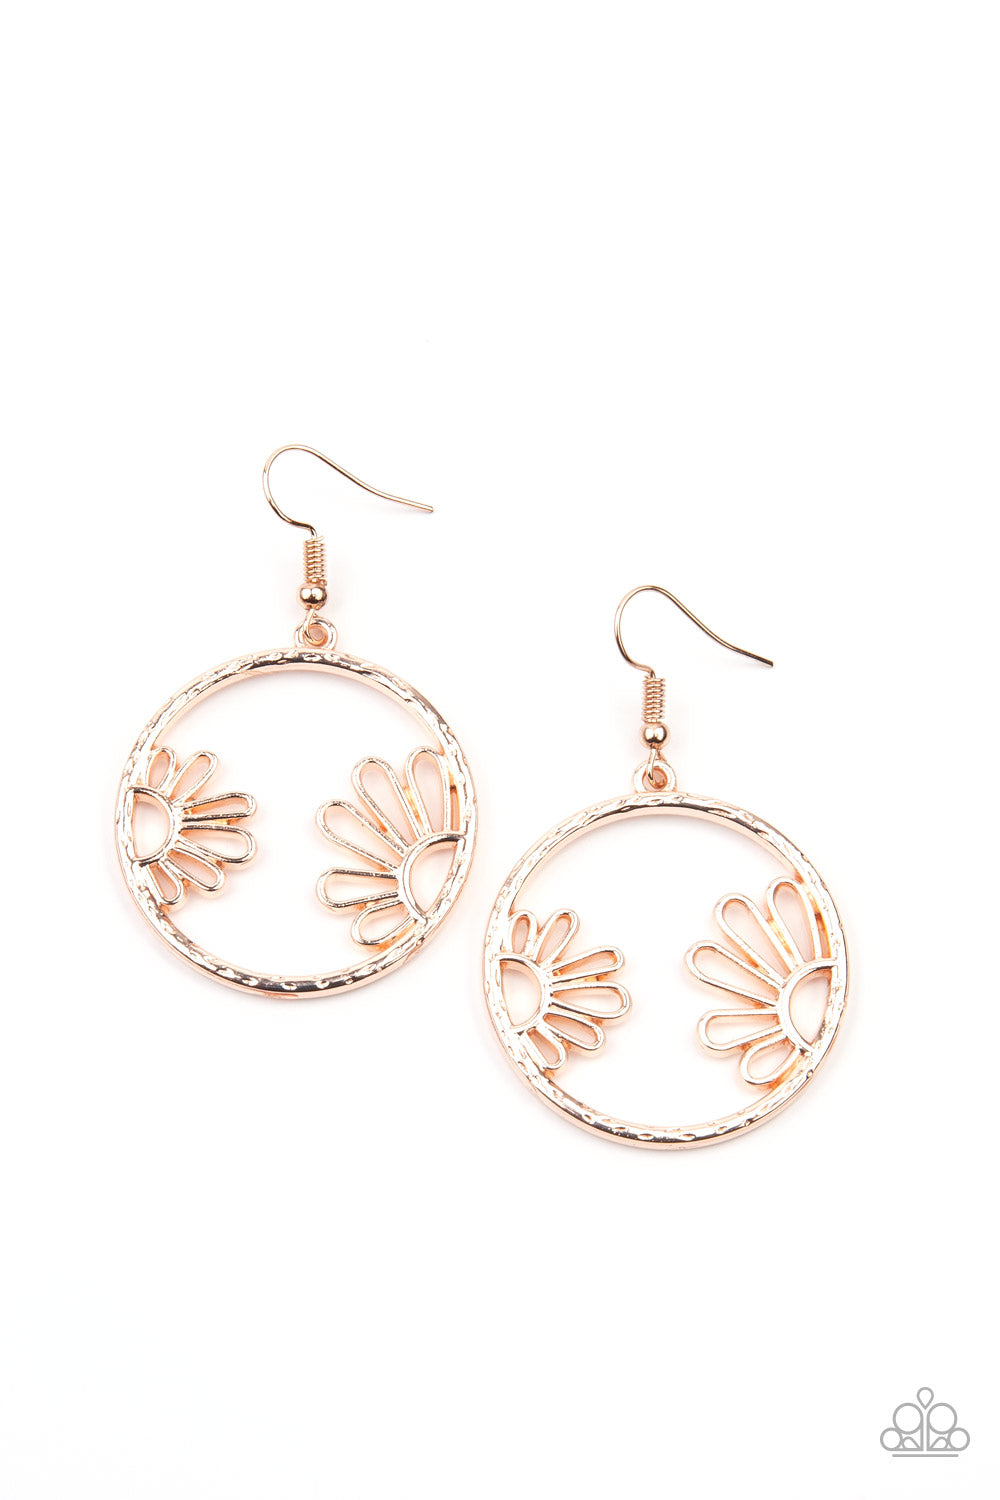 Paparazzi Accessories - Demurely Daisy #E530 - Rose Gold Earrings